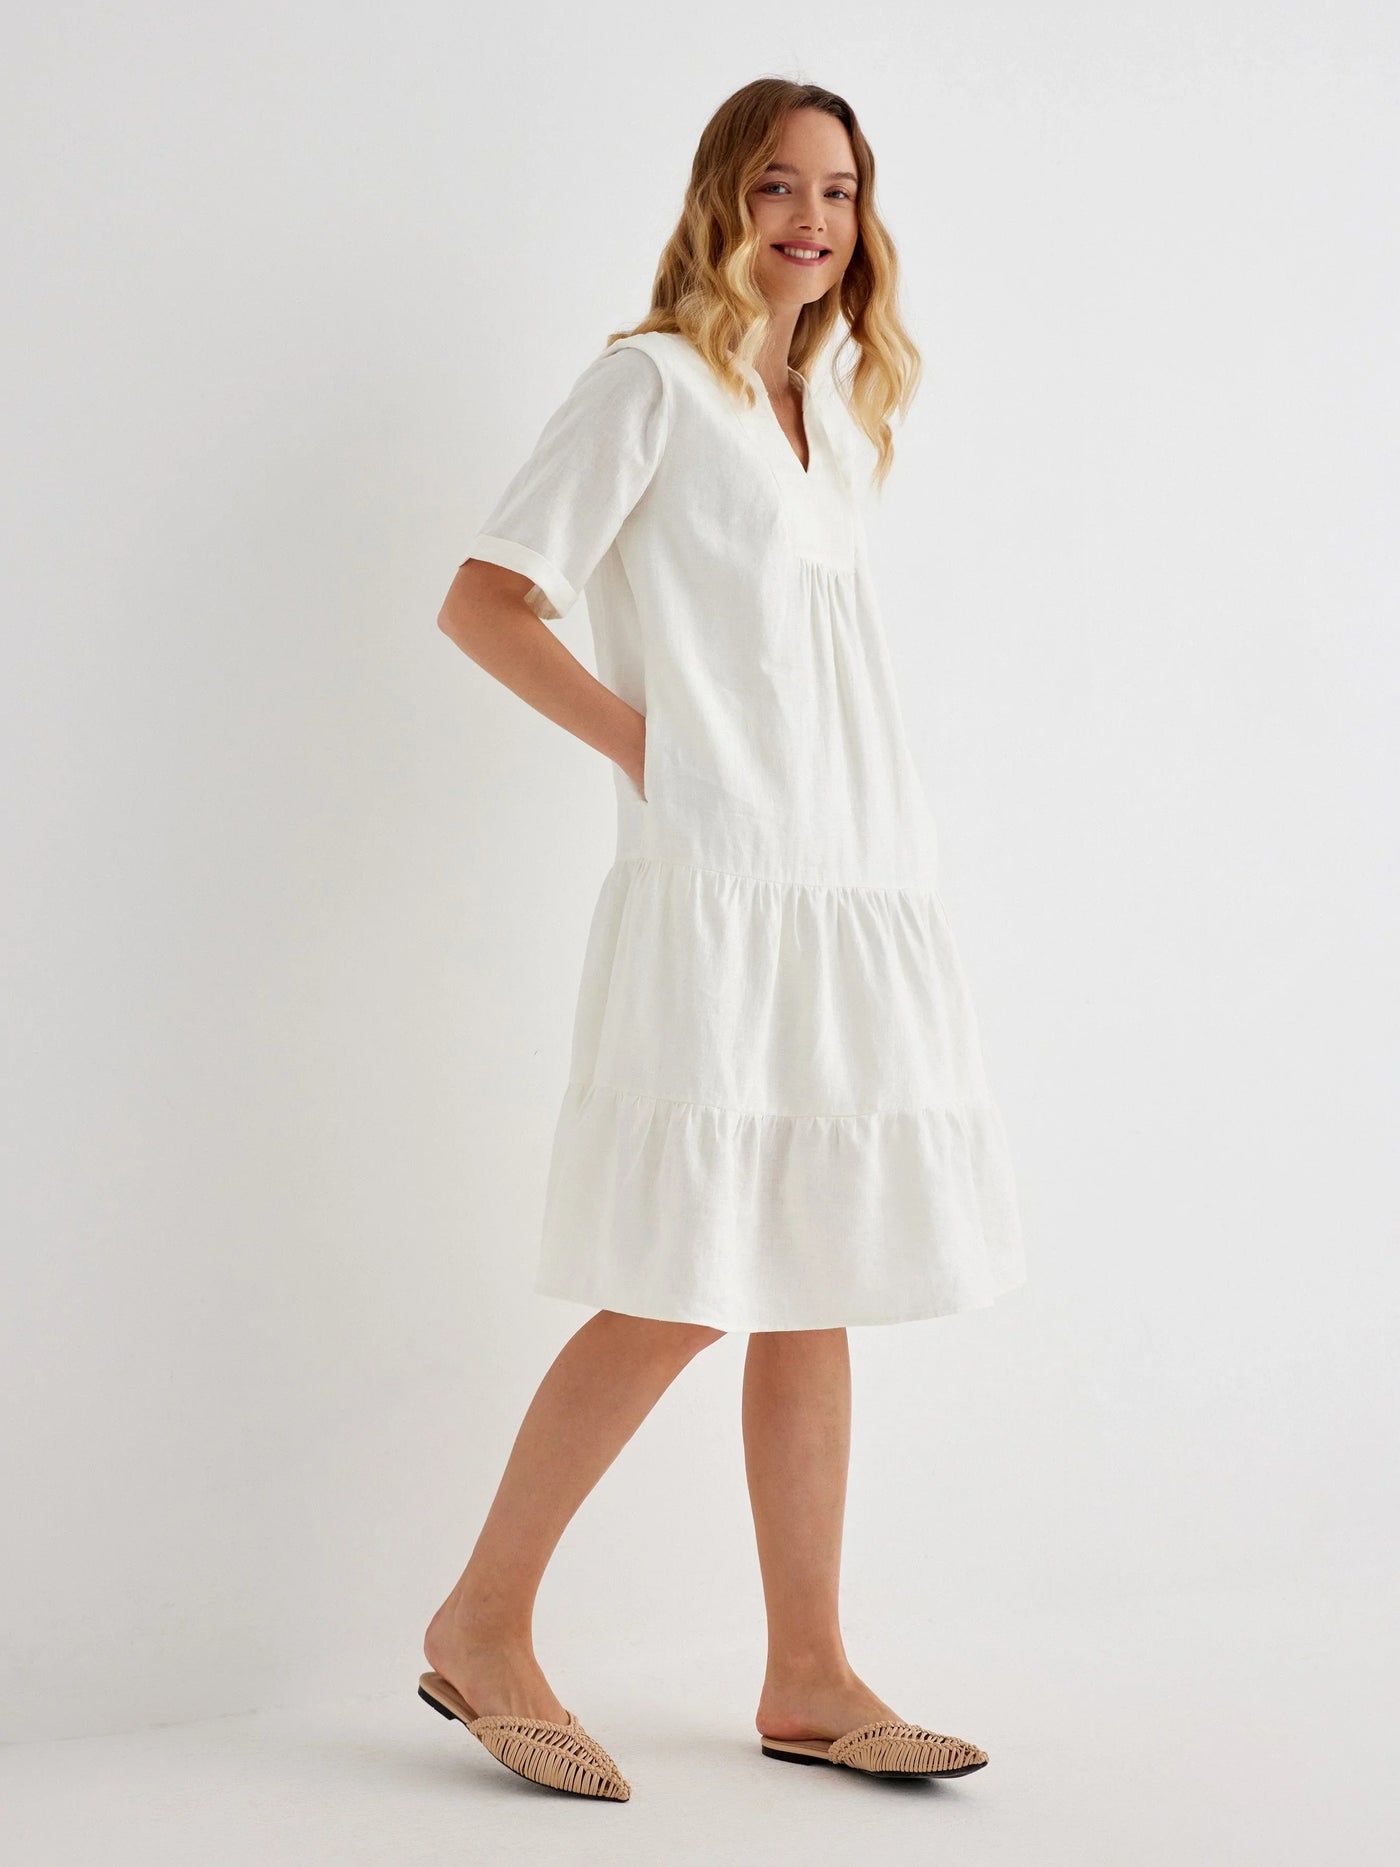 Fallon 100% Linen Relaxed FIt V-neck Tiered Dress